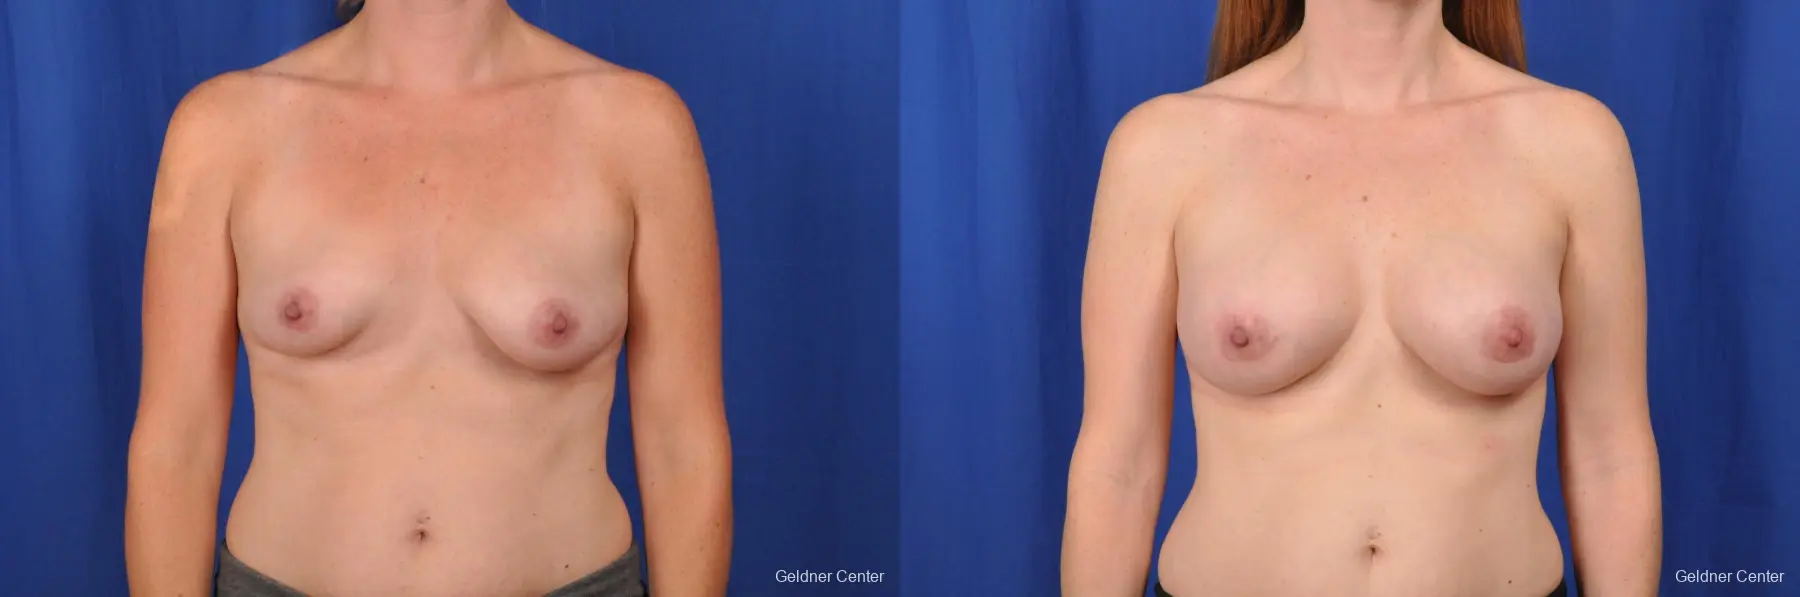 Breast Augmentation Hinsdale, Chicago 2531 - Before and After 1